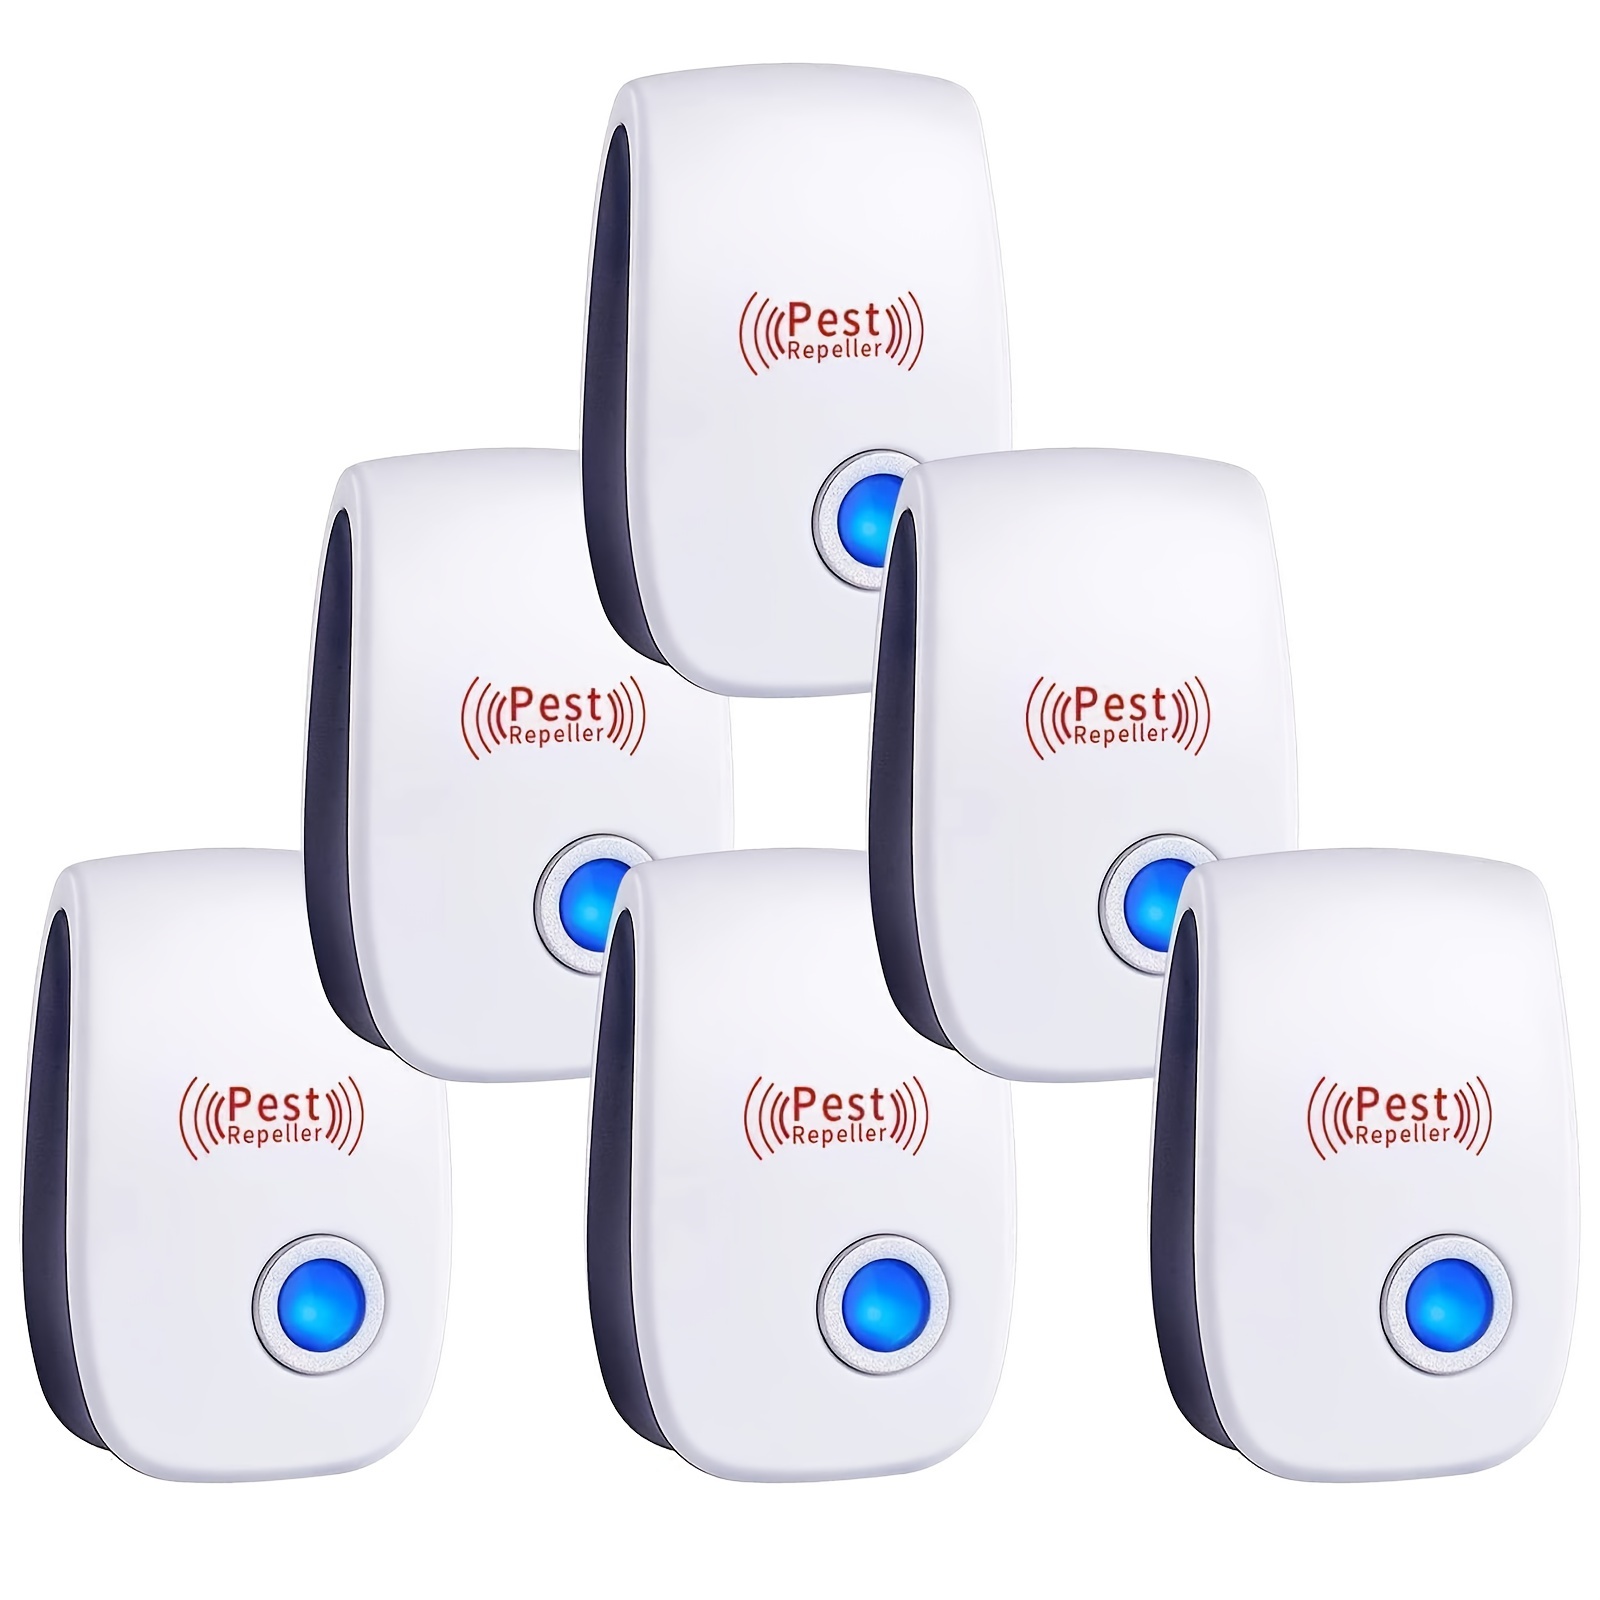 1 2pcs Ultrasonic Pest Repeller Electronic Plug In Indoor Sonic Repellent Pest Control For Bugs Roaches Insects Mice Spiders Mosquitoes